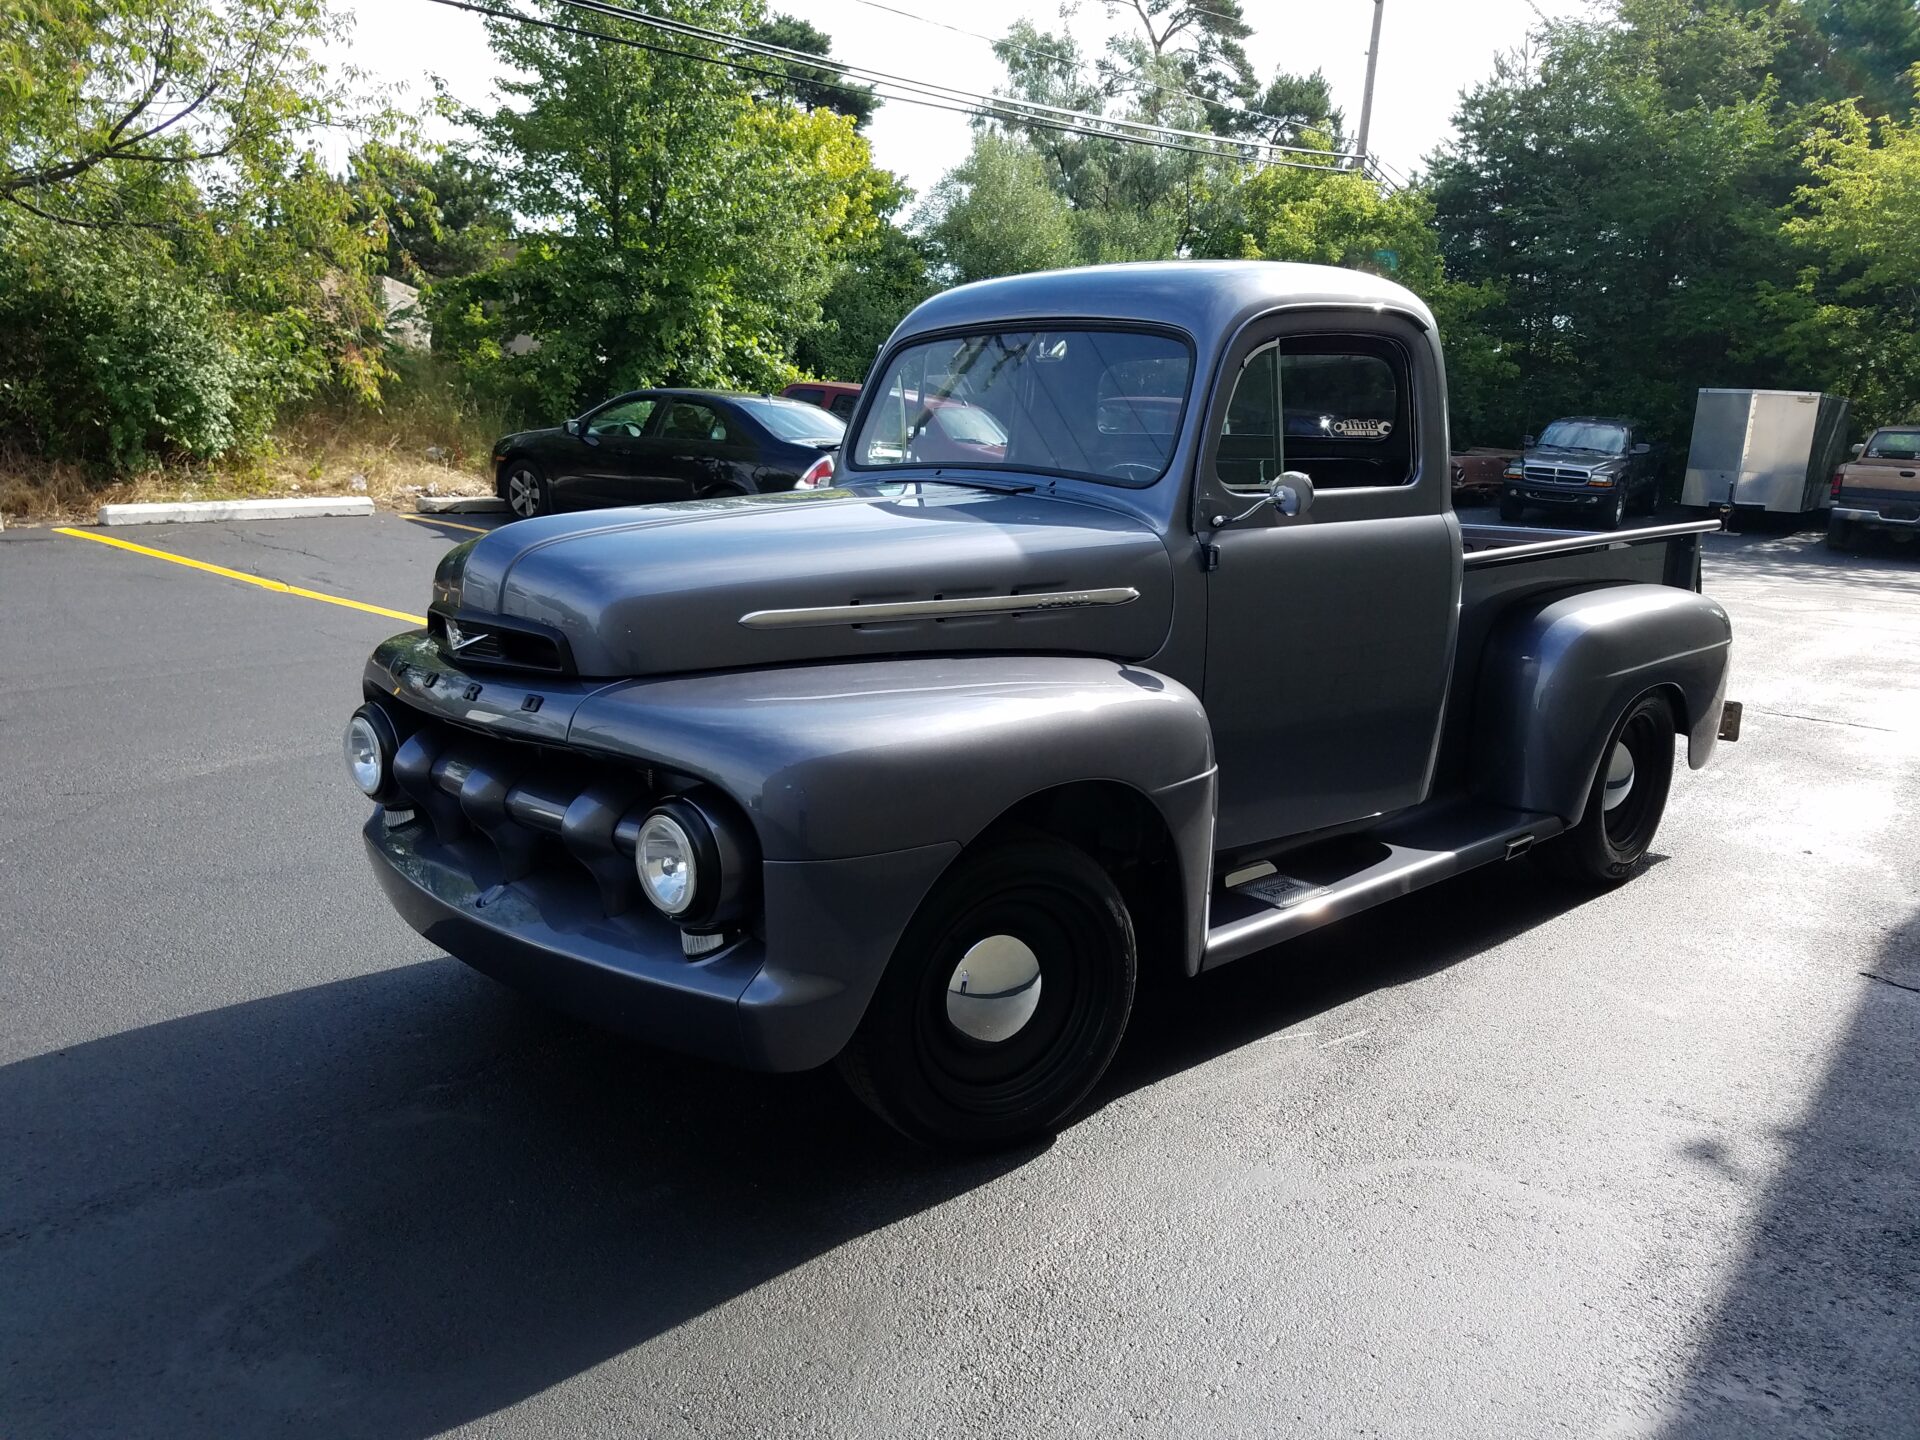 A side view of the 1952 Ford F100 model